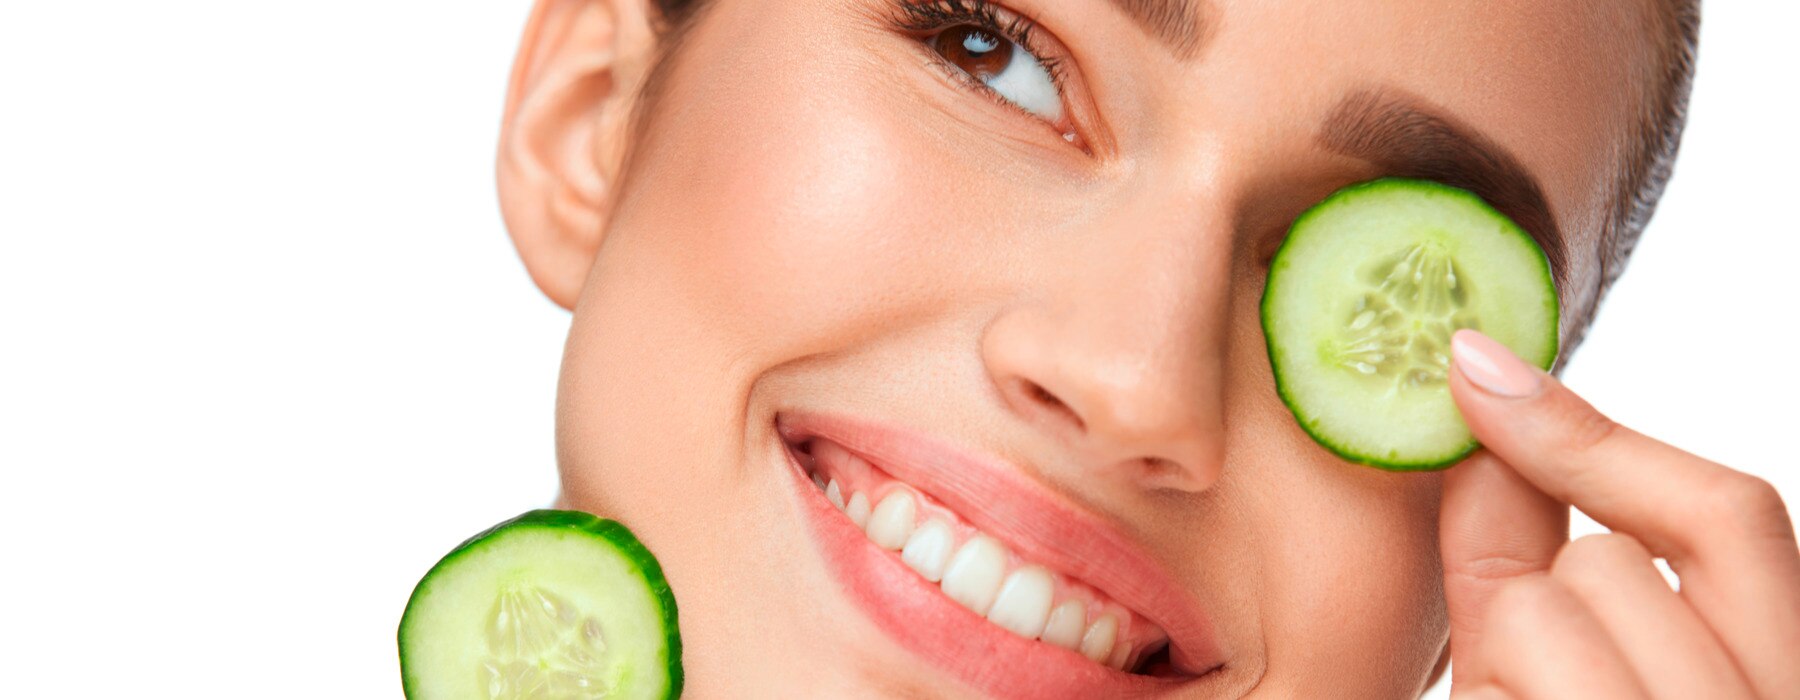 beautiful woman with healthy skin holding slices of cucumber